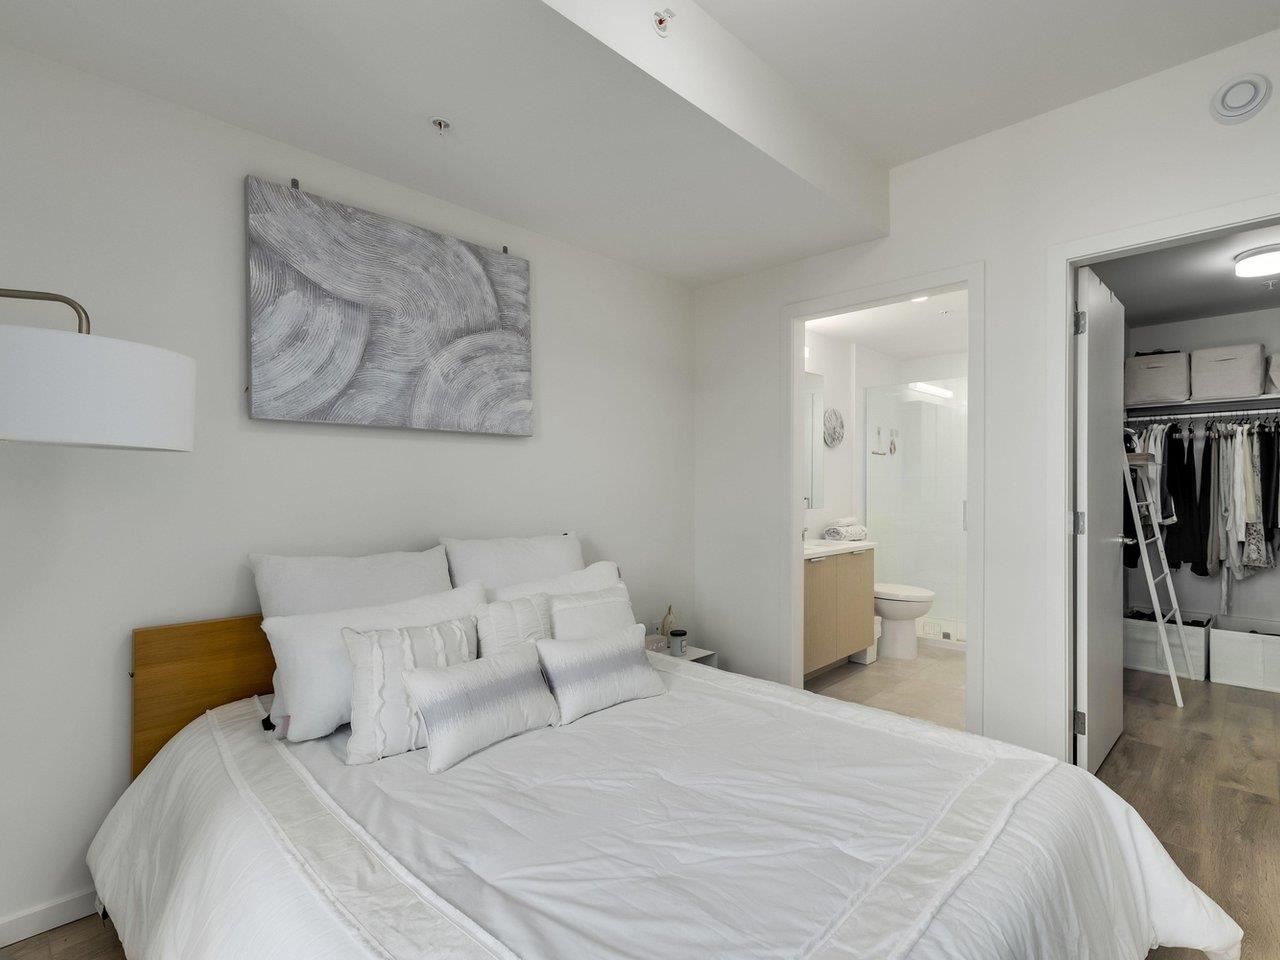 Photo 14: Photos: 305 5085 MAIN STREET in Vancouver: Main Condo for sale (Vancouver East)  : MLS®# R2585433